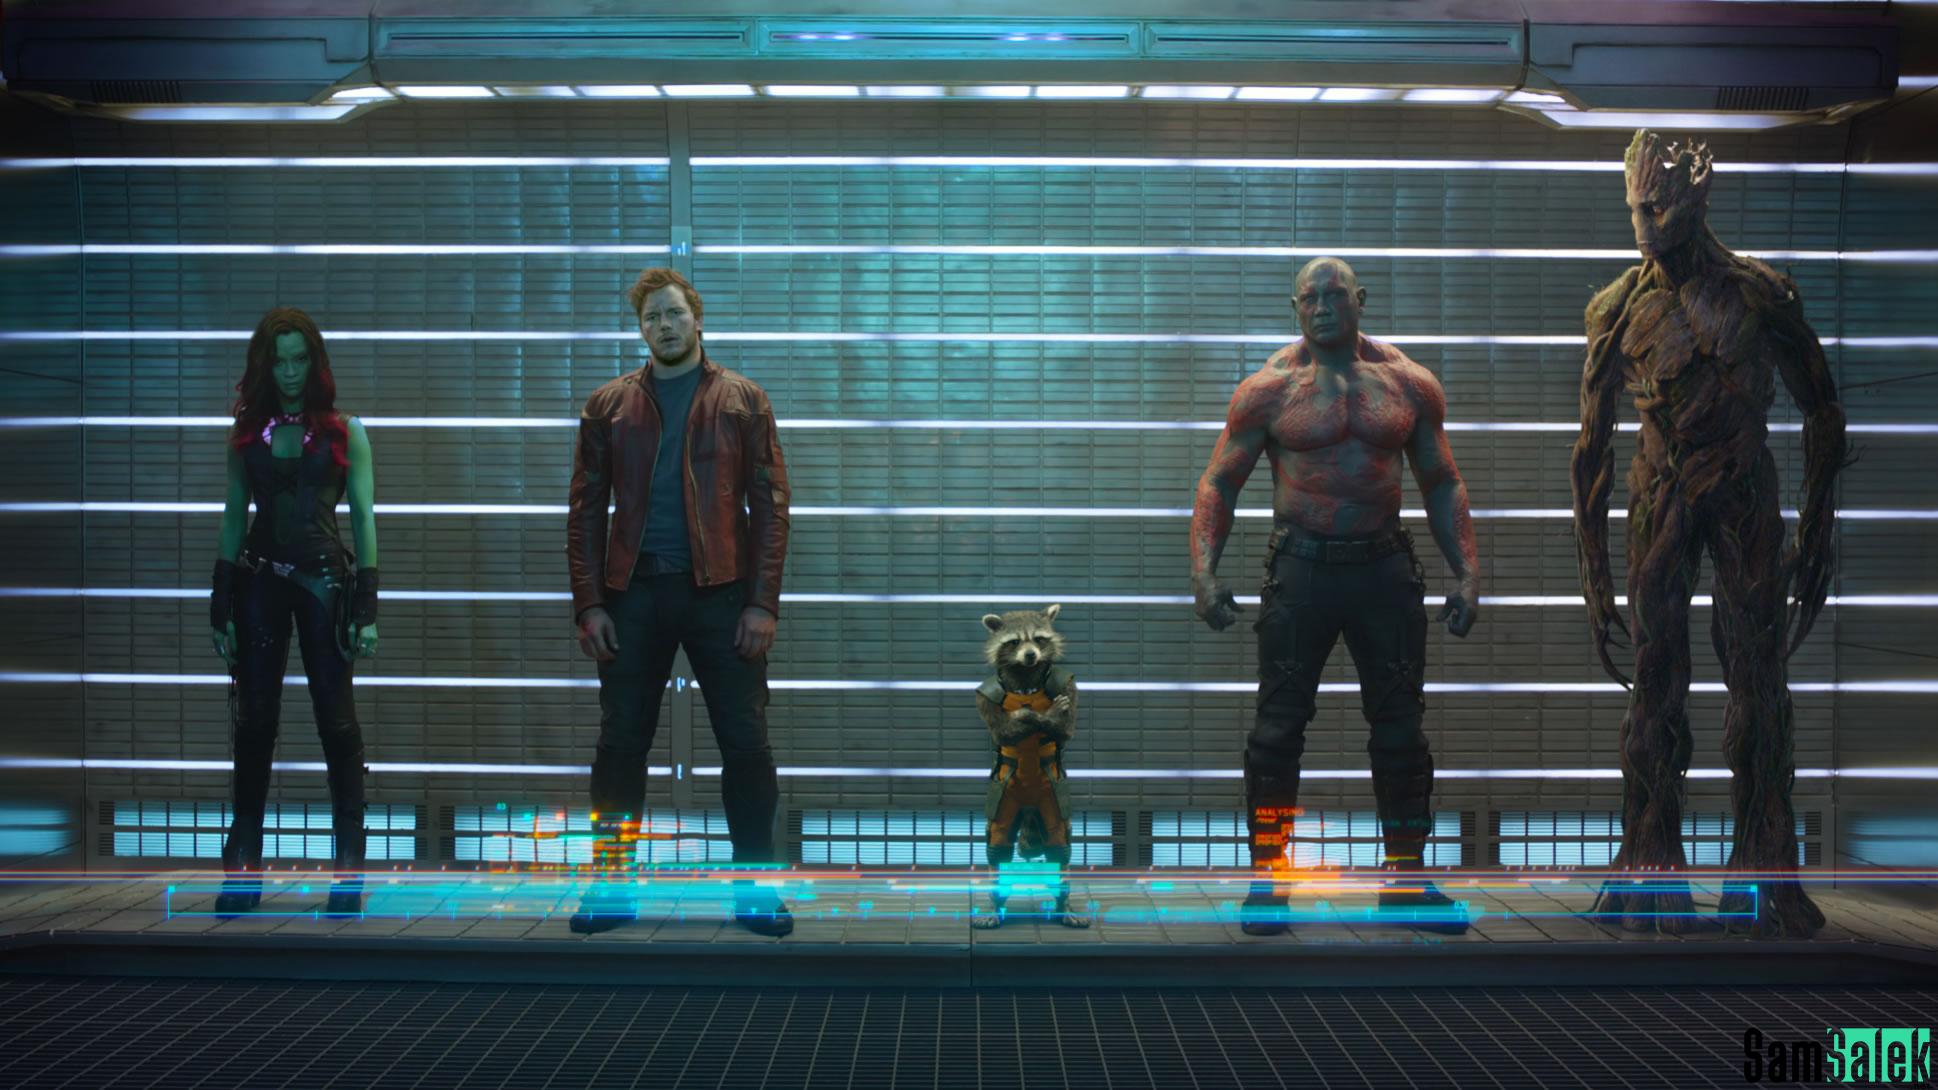 guardians-galaxy-big-is-guardians-of-the-galaxy-marvel-s-justice-league